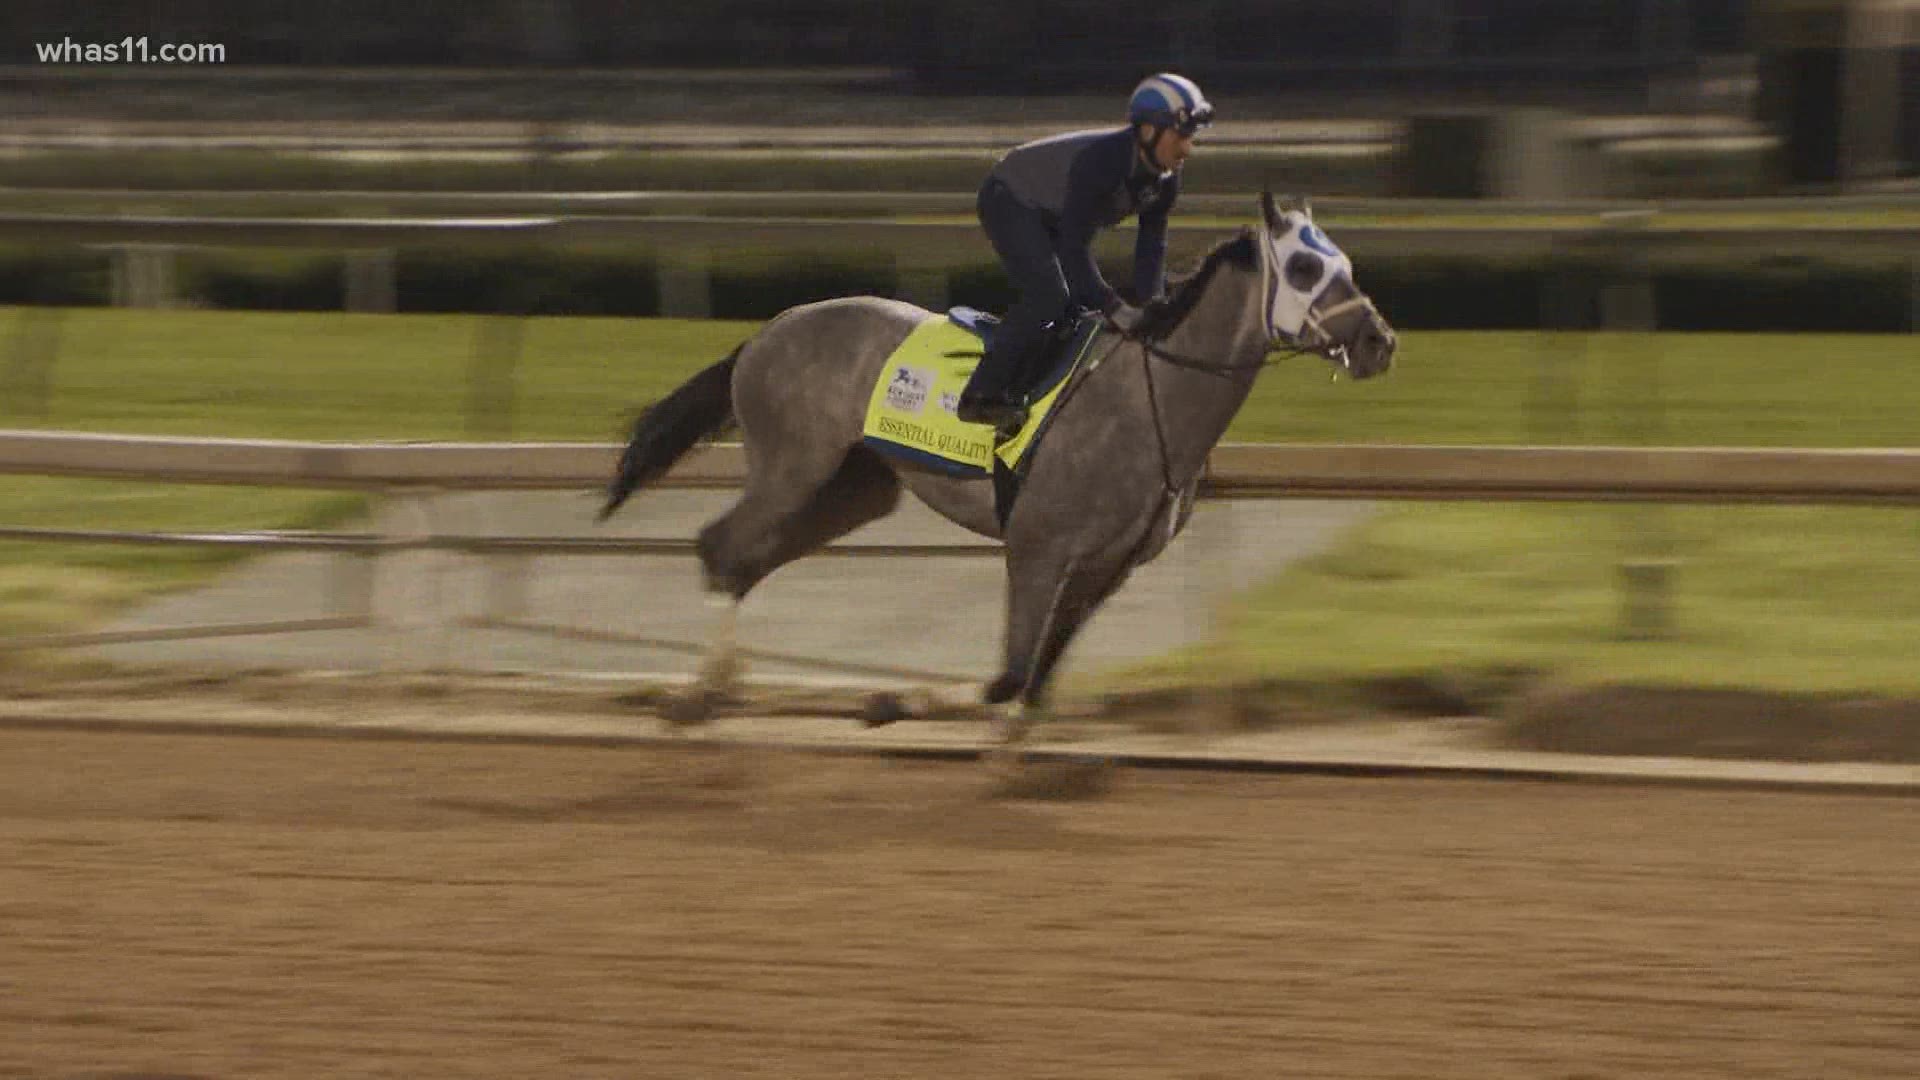 Essential Quality is expected to be the first gray horse favored to win the Kentucky Derby in 25 years. A gray horse hasn't won the Derby since Giacomo in 2005.